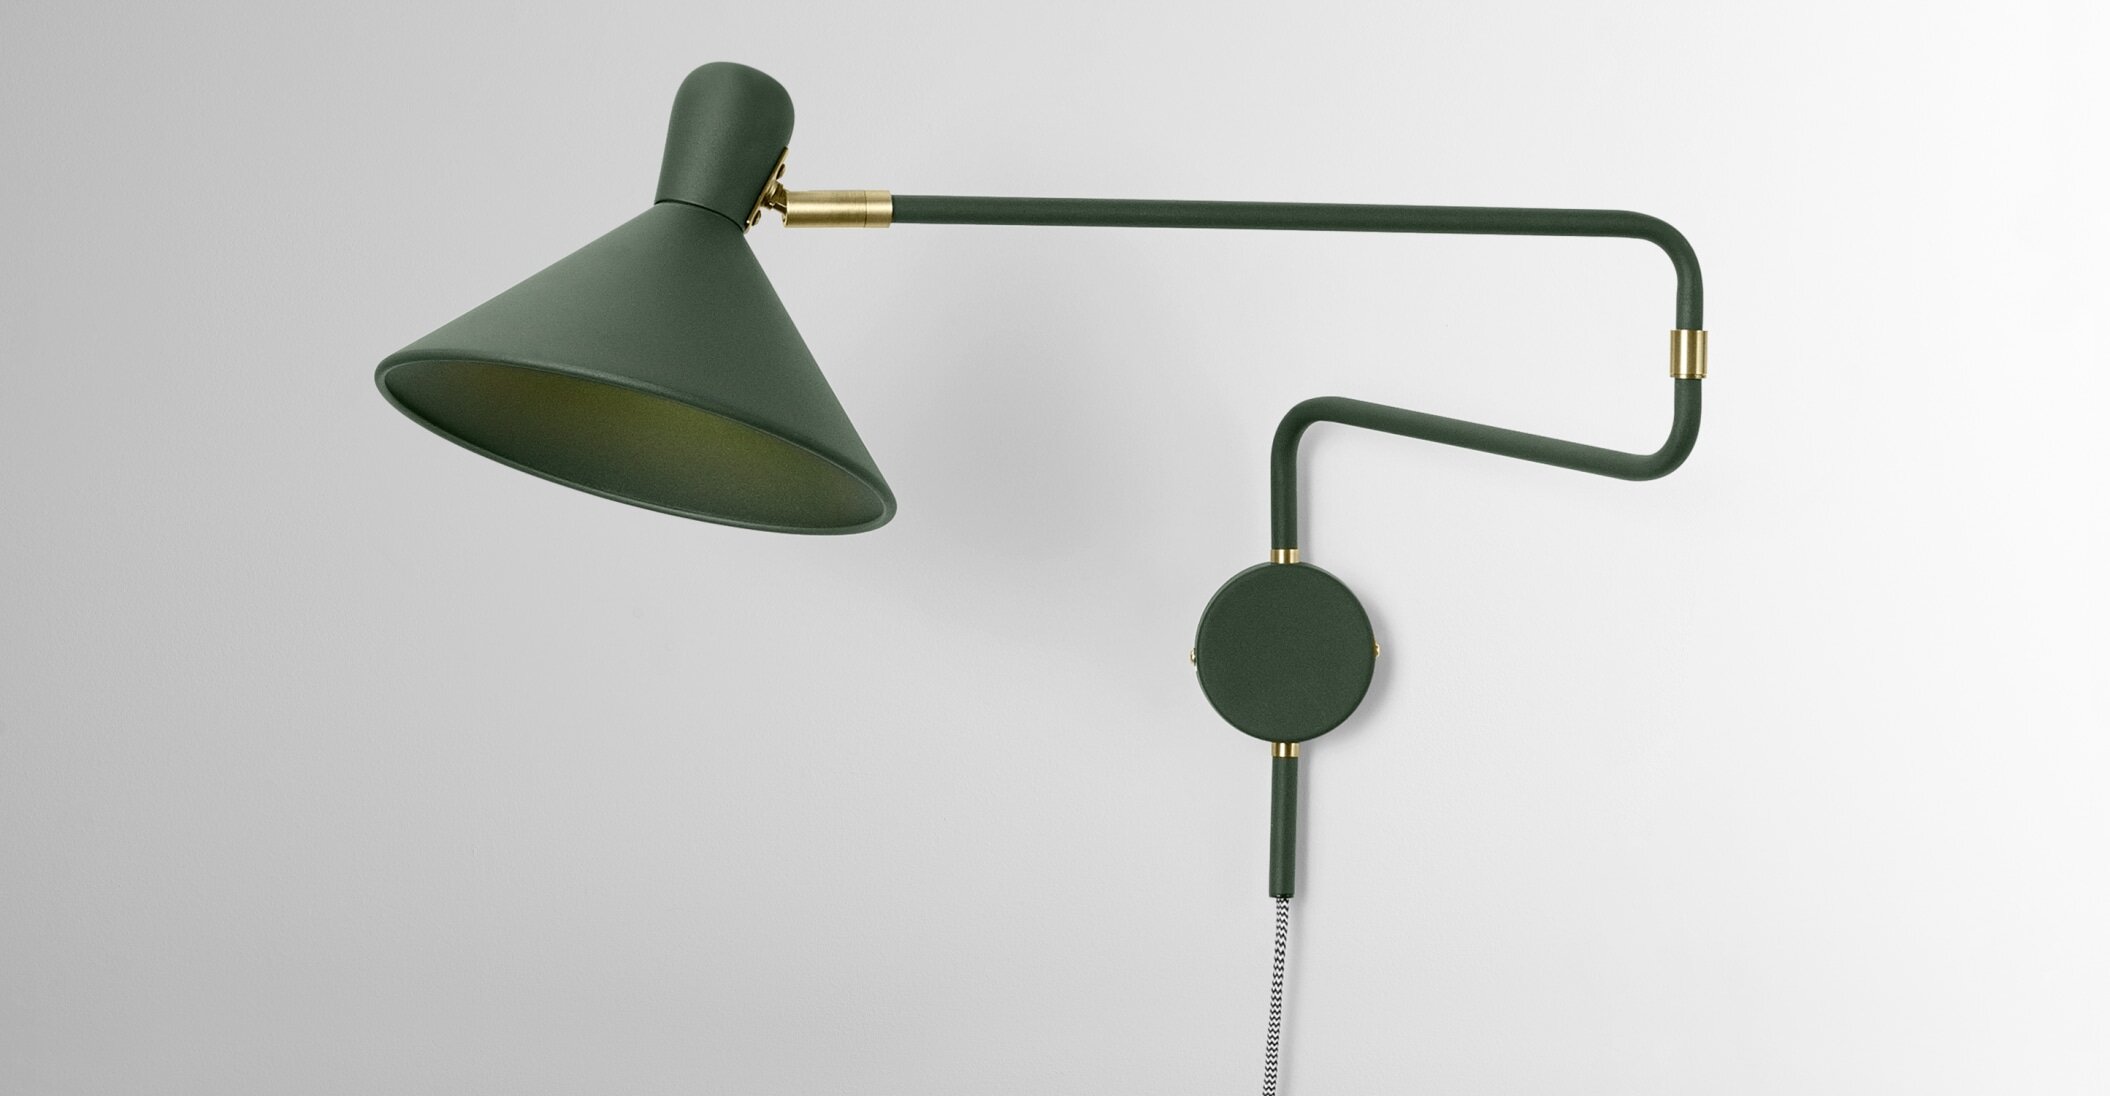 3e6c415762f88b29c4b91498c2dff2df4bde67b2_WLPOGI015GRN_UK_Ogilvy_Swing_Arm_Wall_Lamp_Green_and_Anitque_Brass_LB01.jpg